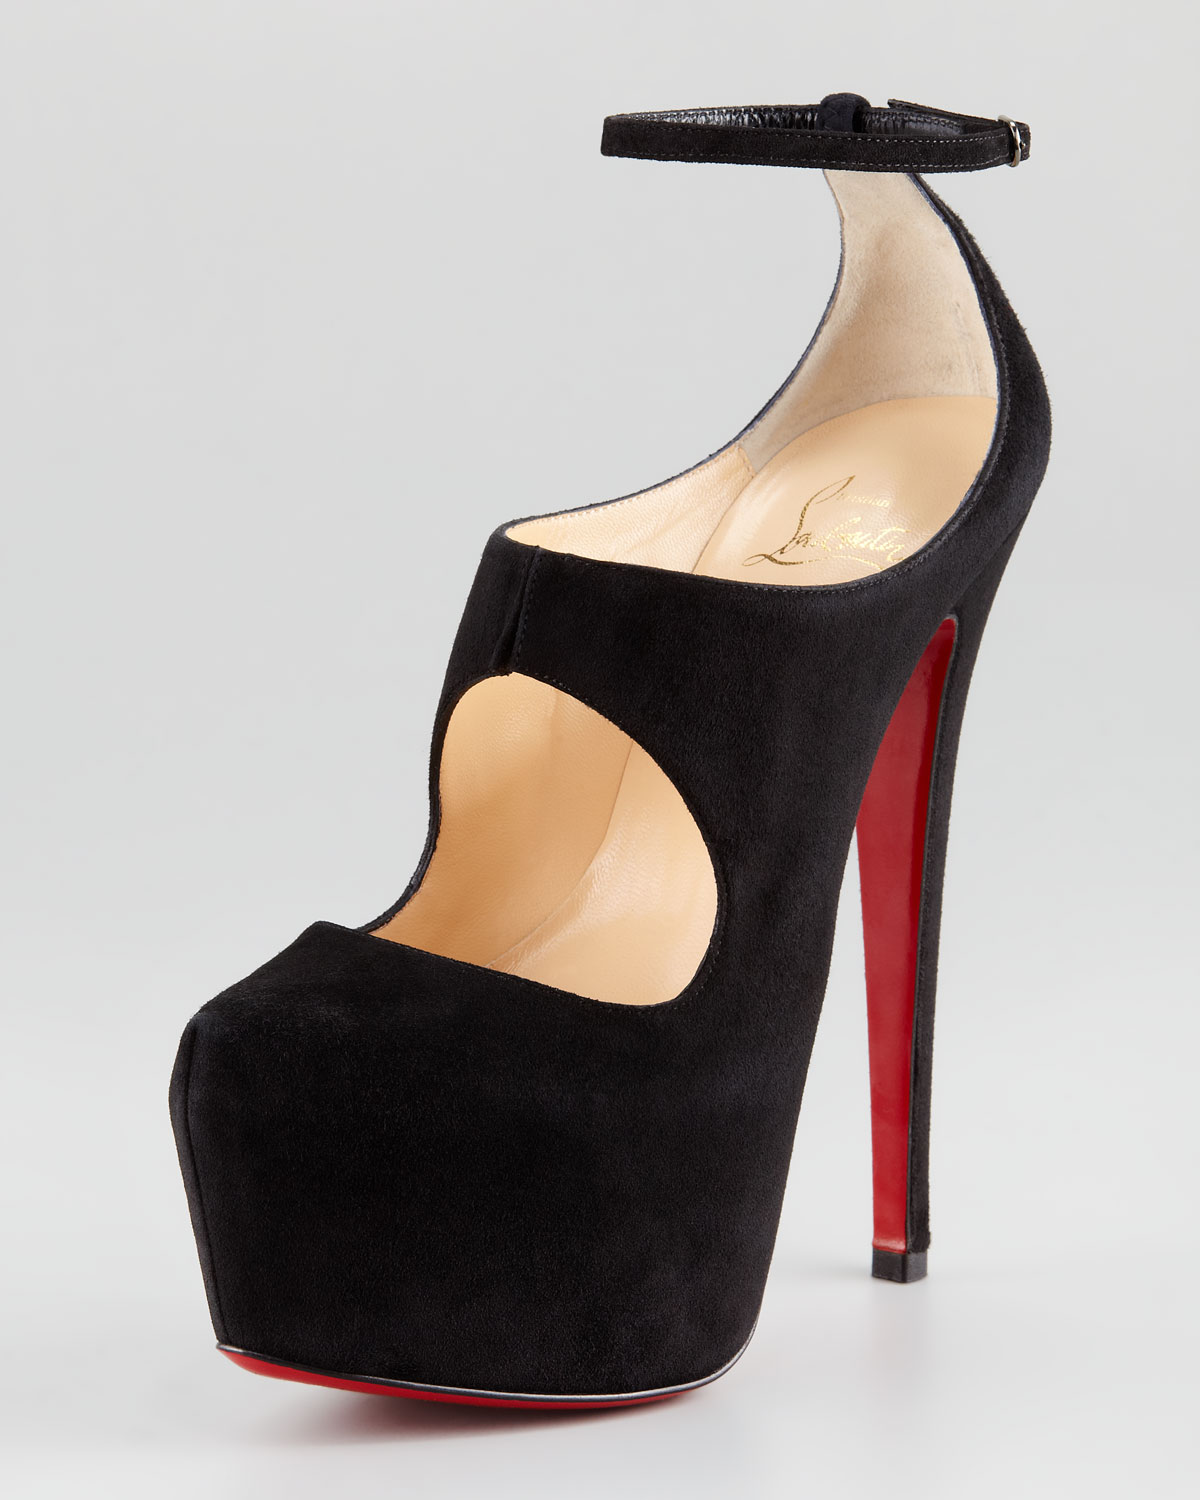 Lyst - Christian Louboutin Maillot Cutout Platform Red Sole Pump in Black